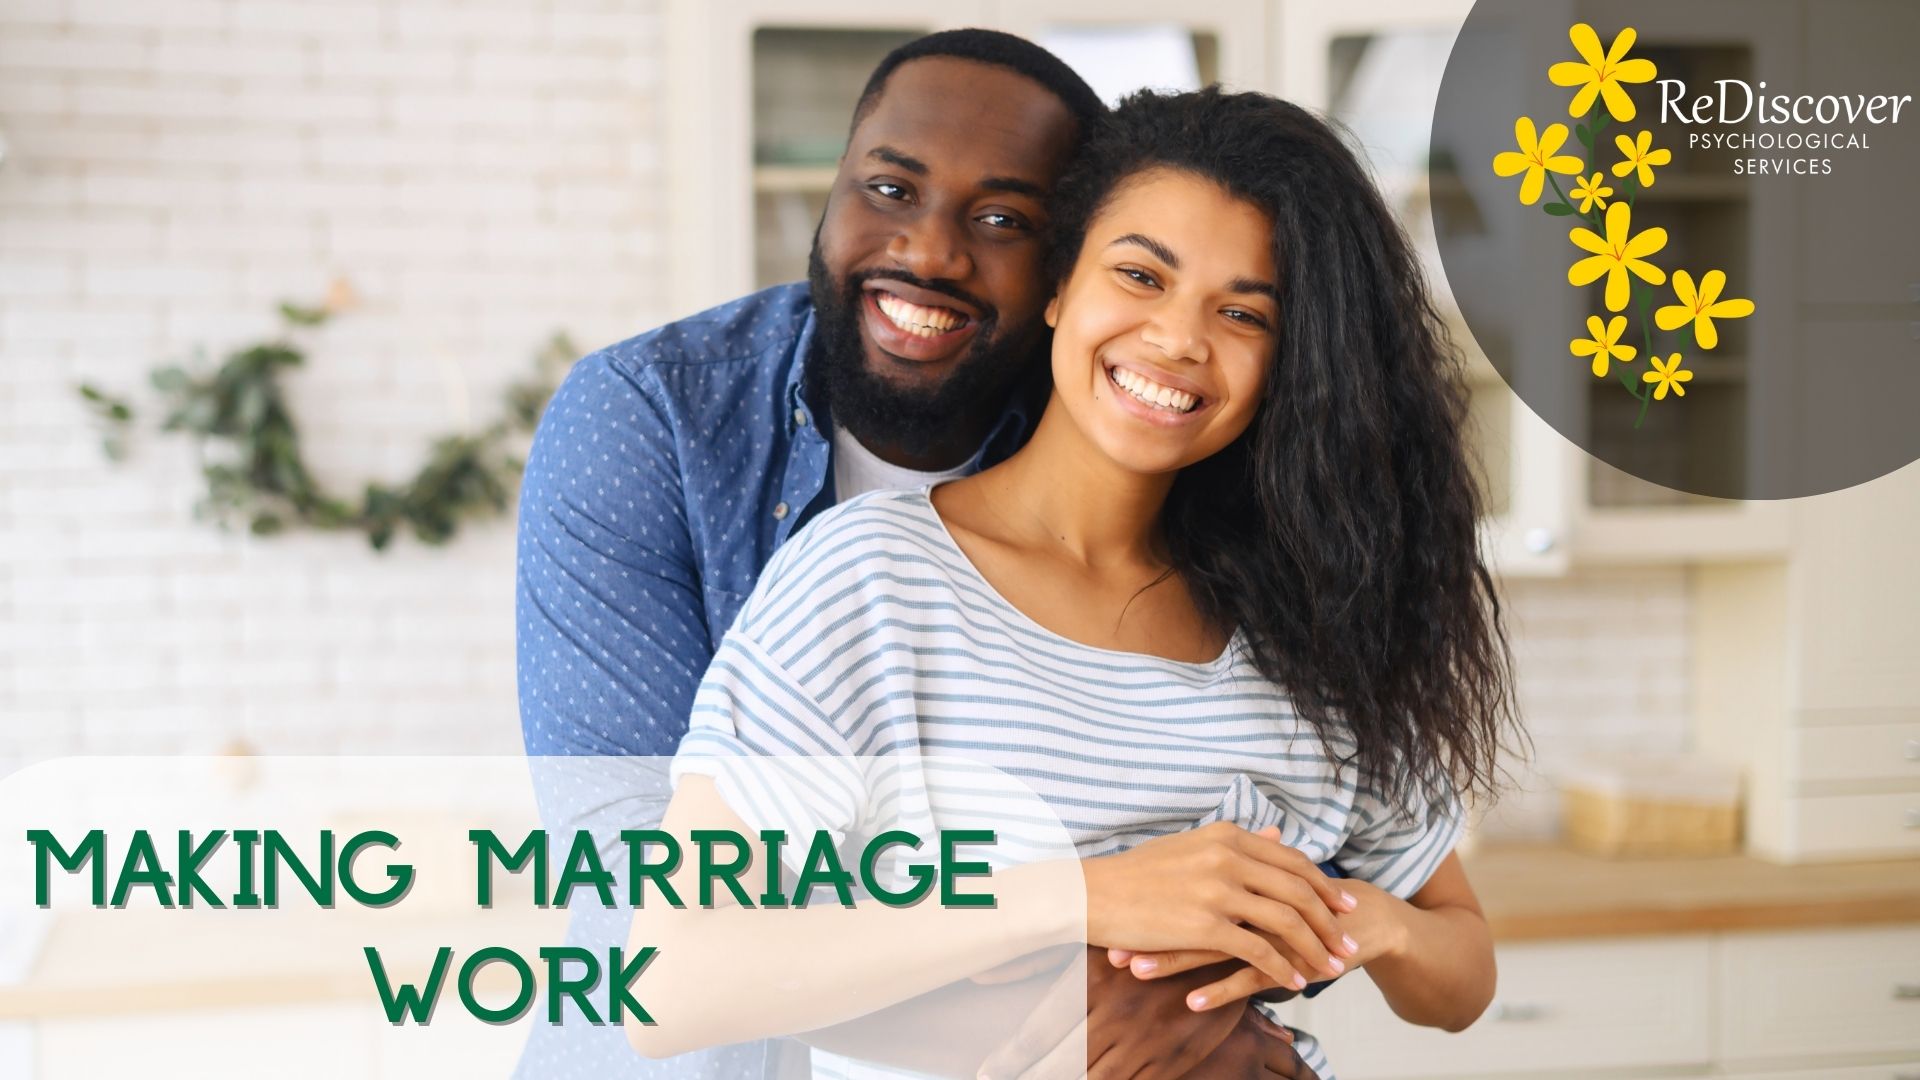 Making Marriage Work by Rediscover Psychological Services